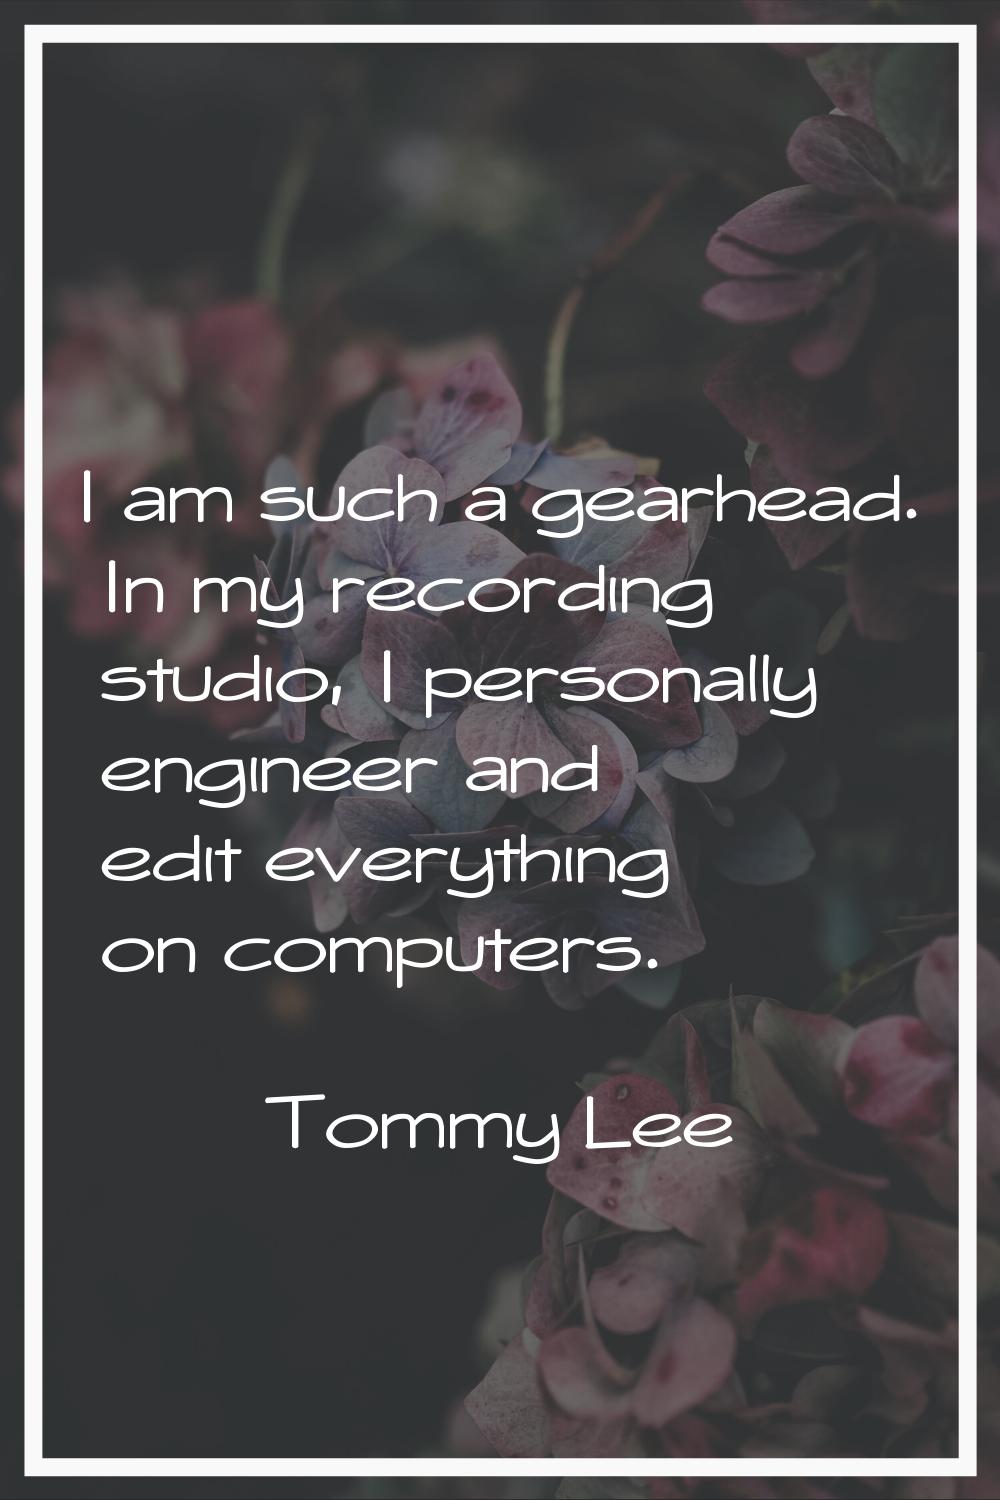 I am such a gearhead. In my recording studio, I personally engineer and edit everything on computer